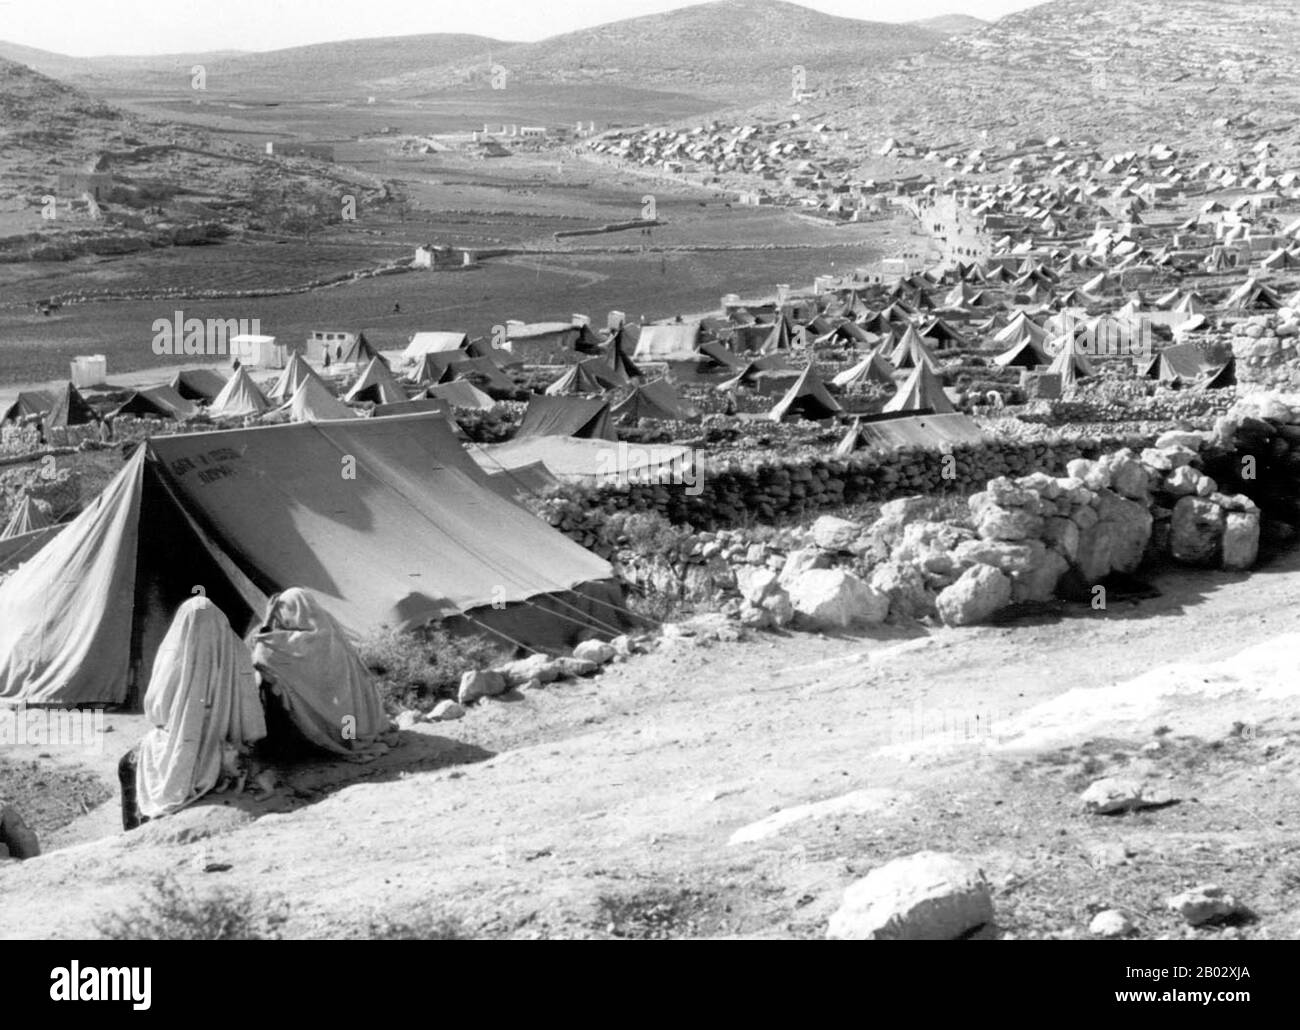 The 1948 Palestinian exodus, known in Arabic as the Nakba (Arabic: an-Nakbah, lit.'catastrophe'), occurred when more than 700,000 Palestinian Arabs fled or were expelled from their homes, during the 1947–1948 Civil War in Mandatory Palestine and the 1948 Arab–Israeli War.  The exact number of refugees is a matter of dispute, but around 80 percent of the Arab inhabitants of what became Israel (50 percent of the Arab total of Mandatory Palestine) left or were expelled from their homes.  Later in the war, Palestinians were forcibly expelled as part of 'Plan Dalet' in a policy of 'ethnic cleansing Stock Photo